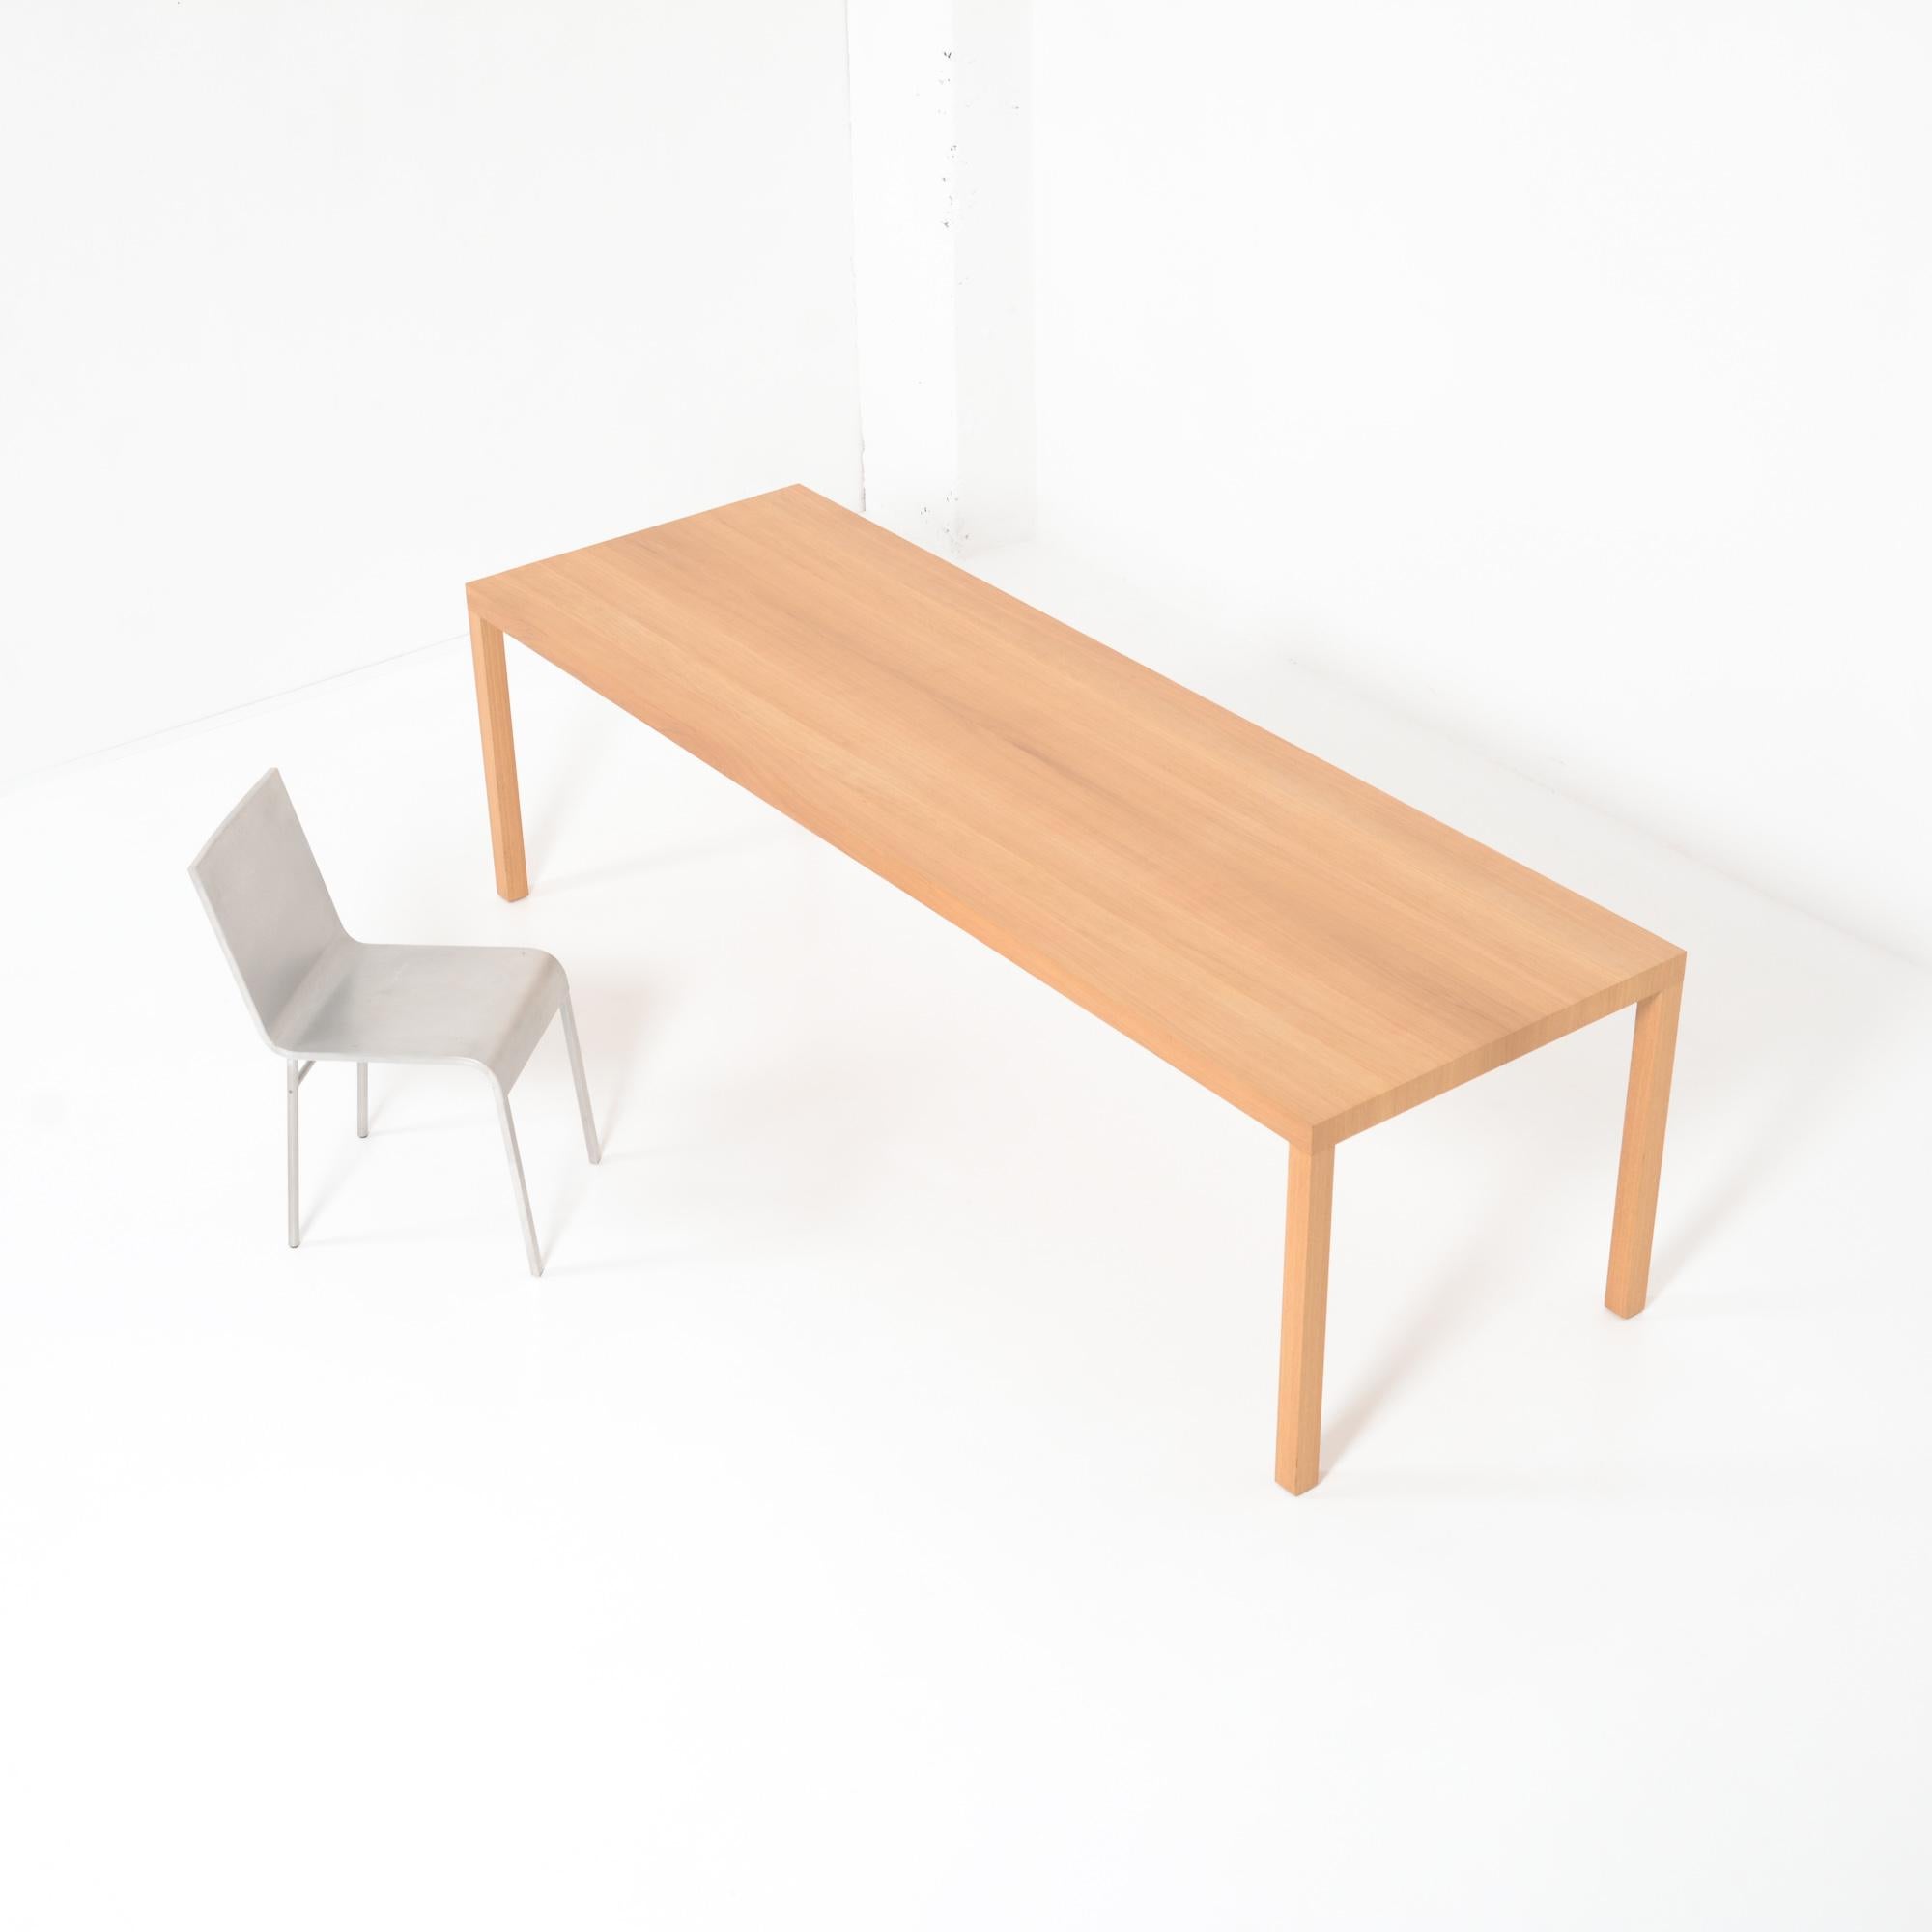 This table was designed by Maarten Van Severen in 1988. It is made of solid oak. This table is produced by Top-Mouton (1999).
Minimalism versus maximalism: Maarten Van Severen designed this table to be used. The table is a place to meet friends, to